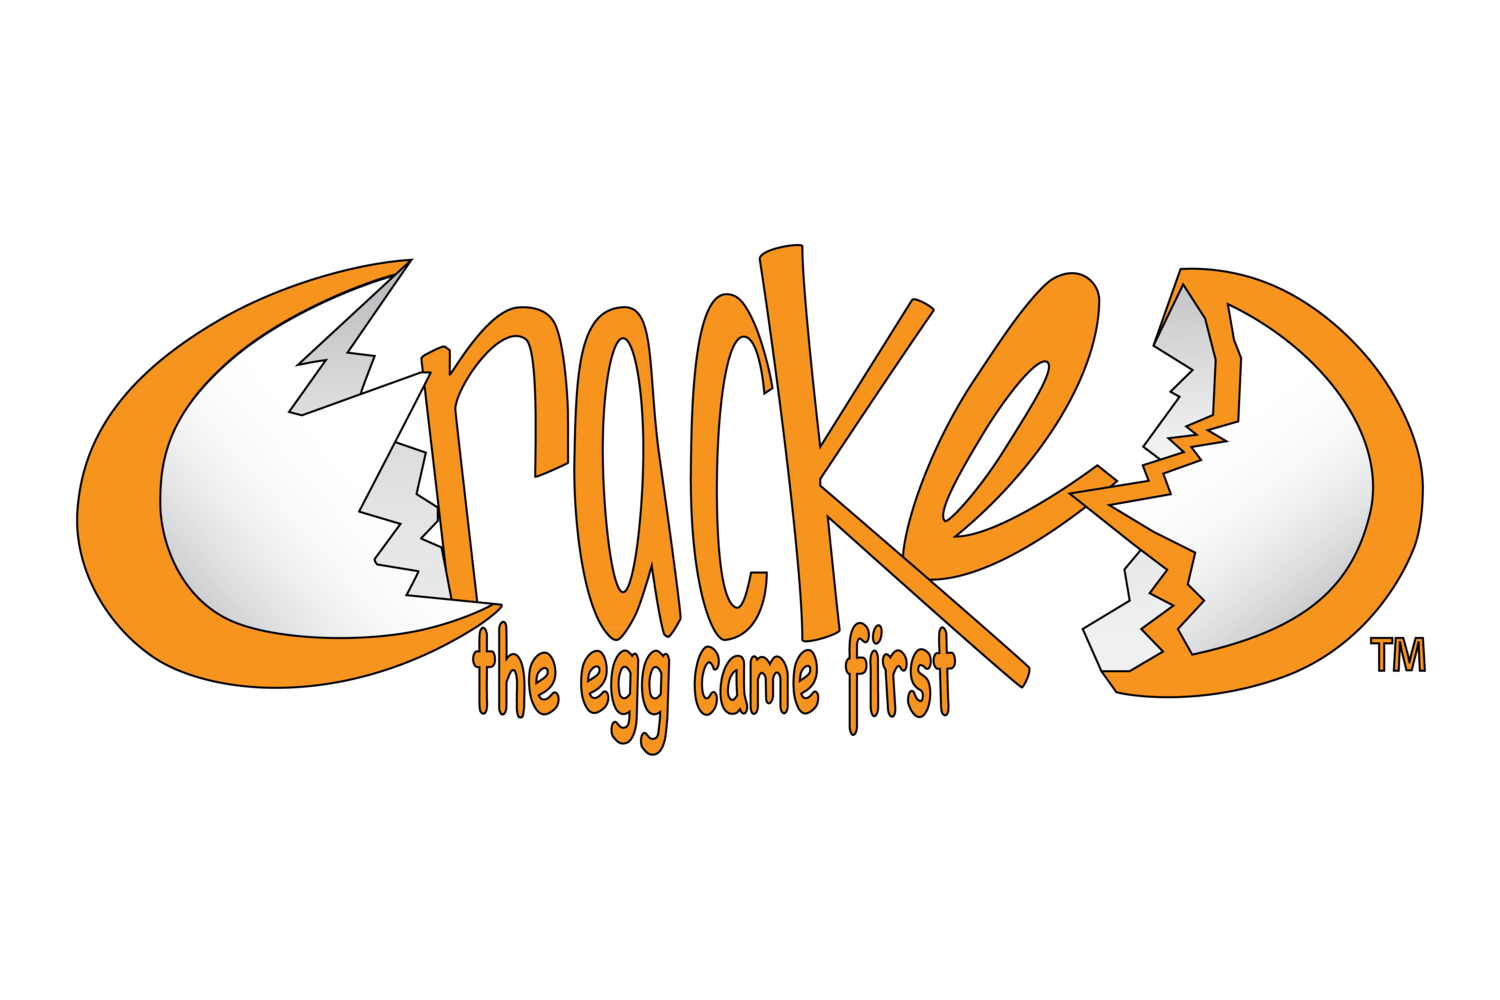 Cracked: The Egg Came First